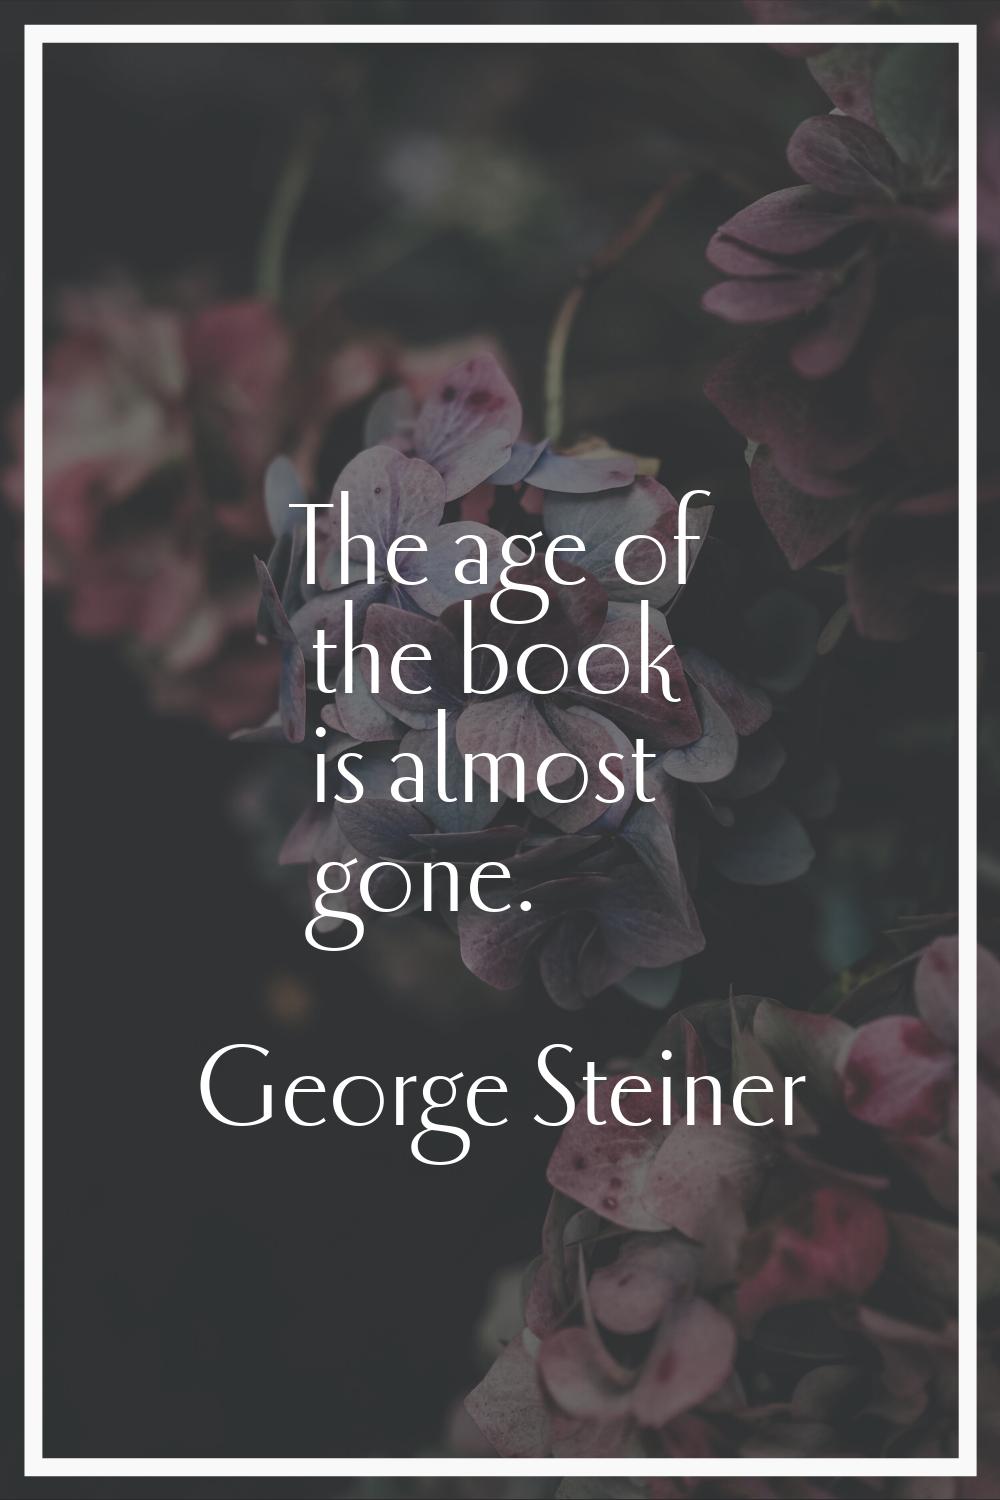 The age of the book is almost gone.